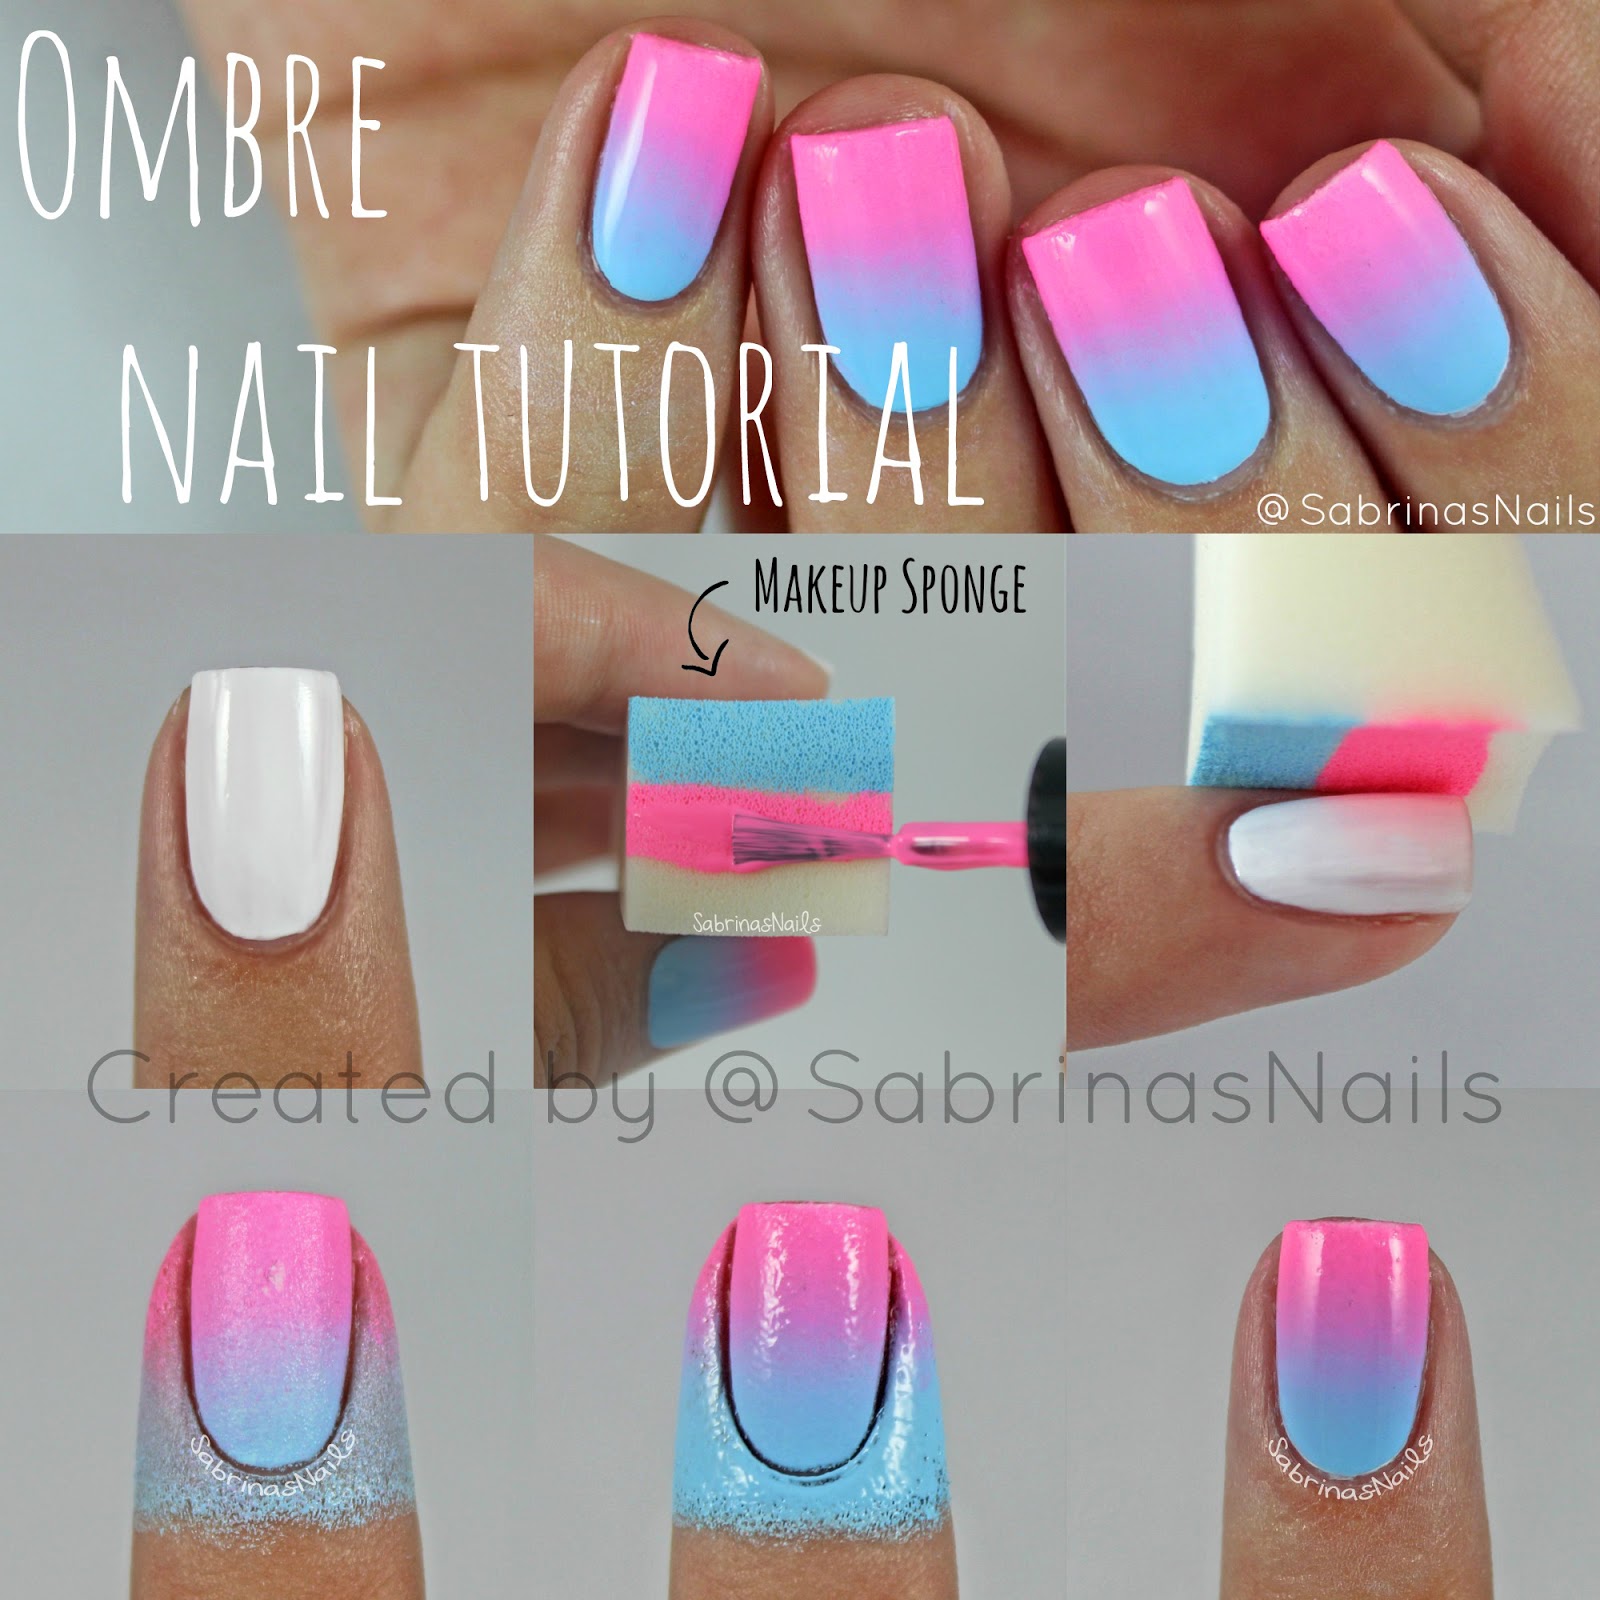 How to Do Ombre Nails at Home Like a Pro